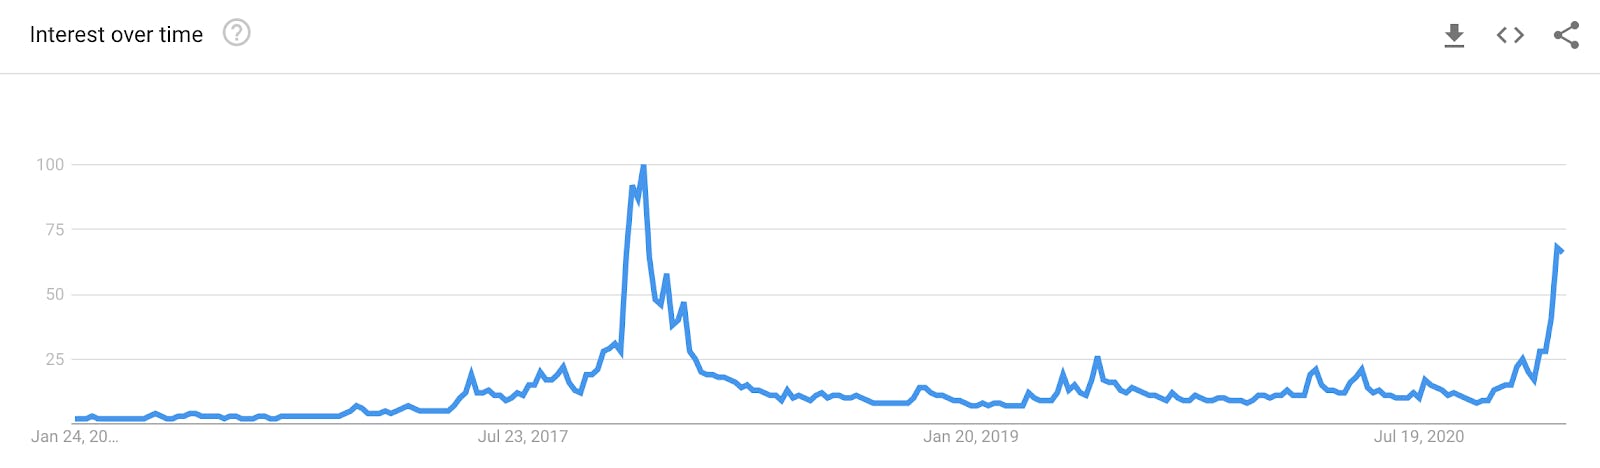 Bitcoin search interest, Google Trends